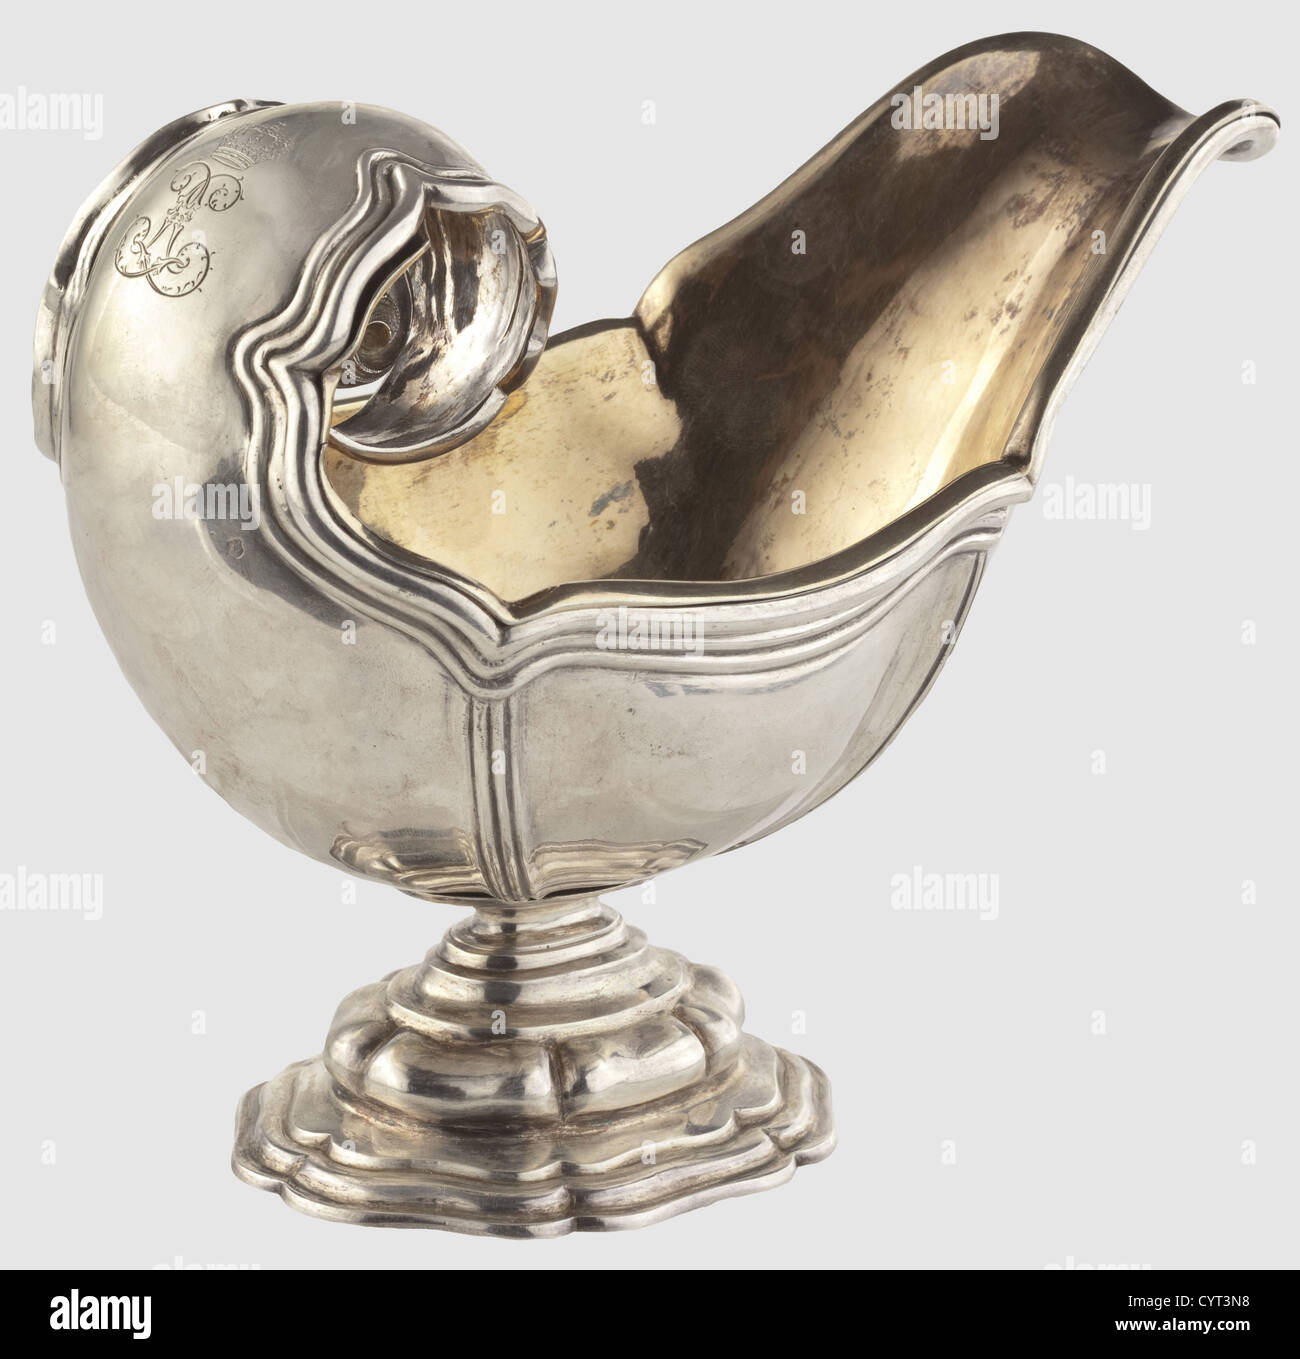 King Ludwig II of Bavaria(1845 - 1886),a silver sauce boat from the King's table service By Court Jeweller Eduard Wollenweber,Munich around 1870/80.Silver with triple banded rim decoration and an incurved handle stamped with decorative leaves.There is a mirror monogram 'L' beneath a Bavarian royal crown,resembling the monogram of the Sun King Louis XIV,engraved on the back of the grip.Gilt silver,turned under insert(loose at one point).'Wollenweber' masters mark and the 'Münchner Kindl' hallmark.The stepped base is marked 'E.W.' and has another City,Additional-Rights-Clearences-Not Available Stock Photo